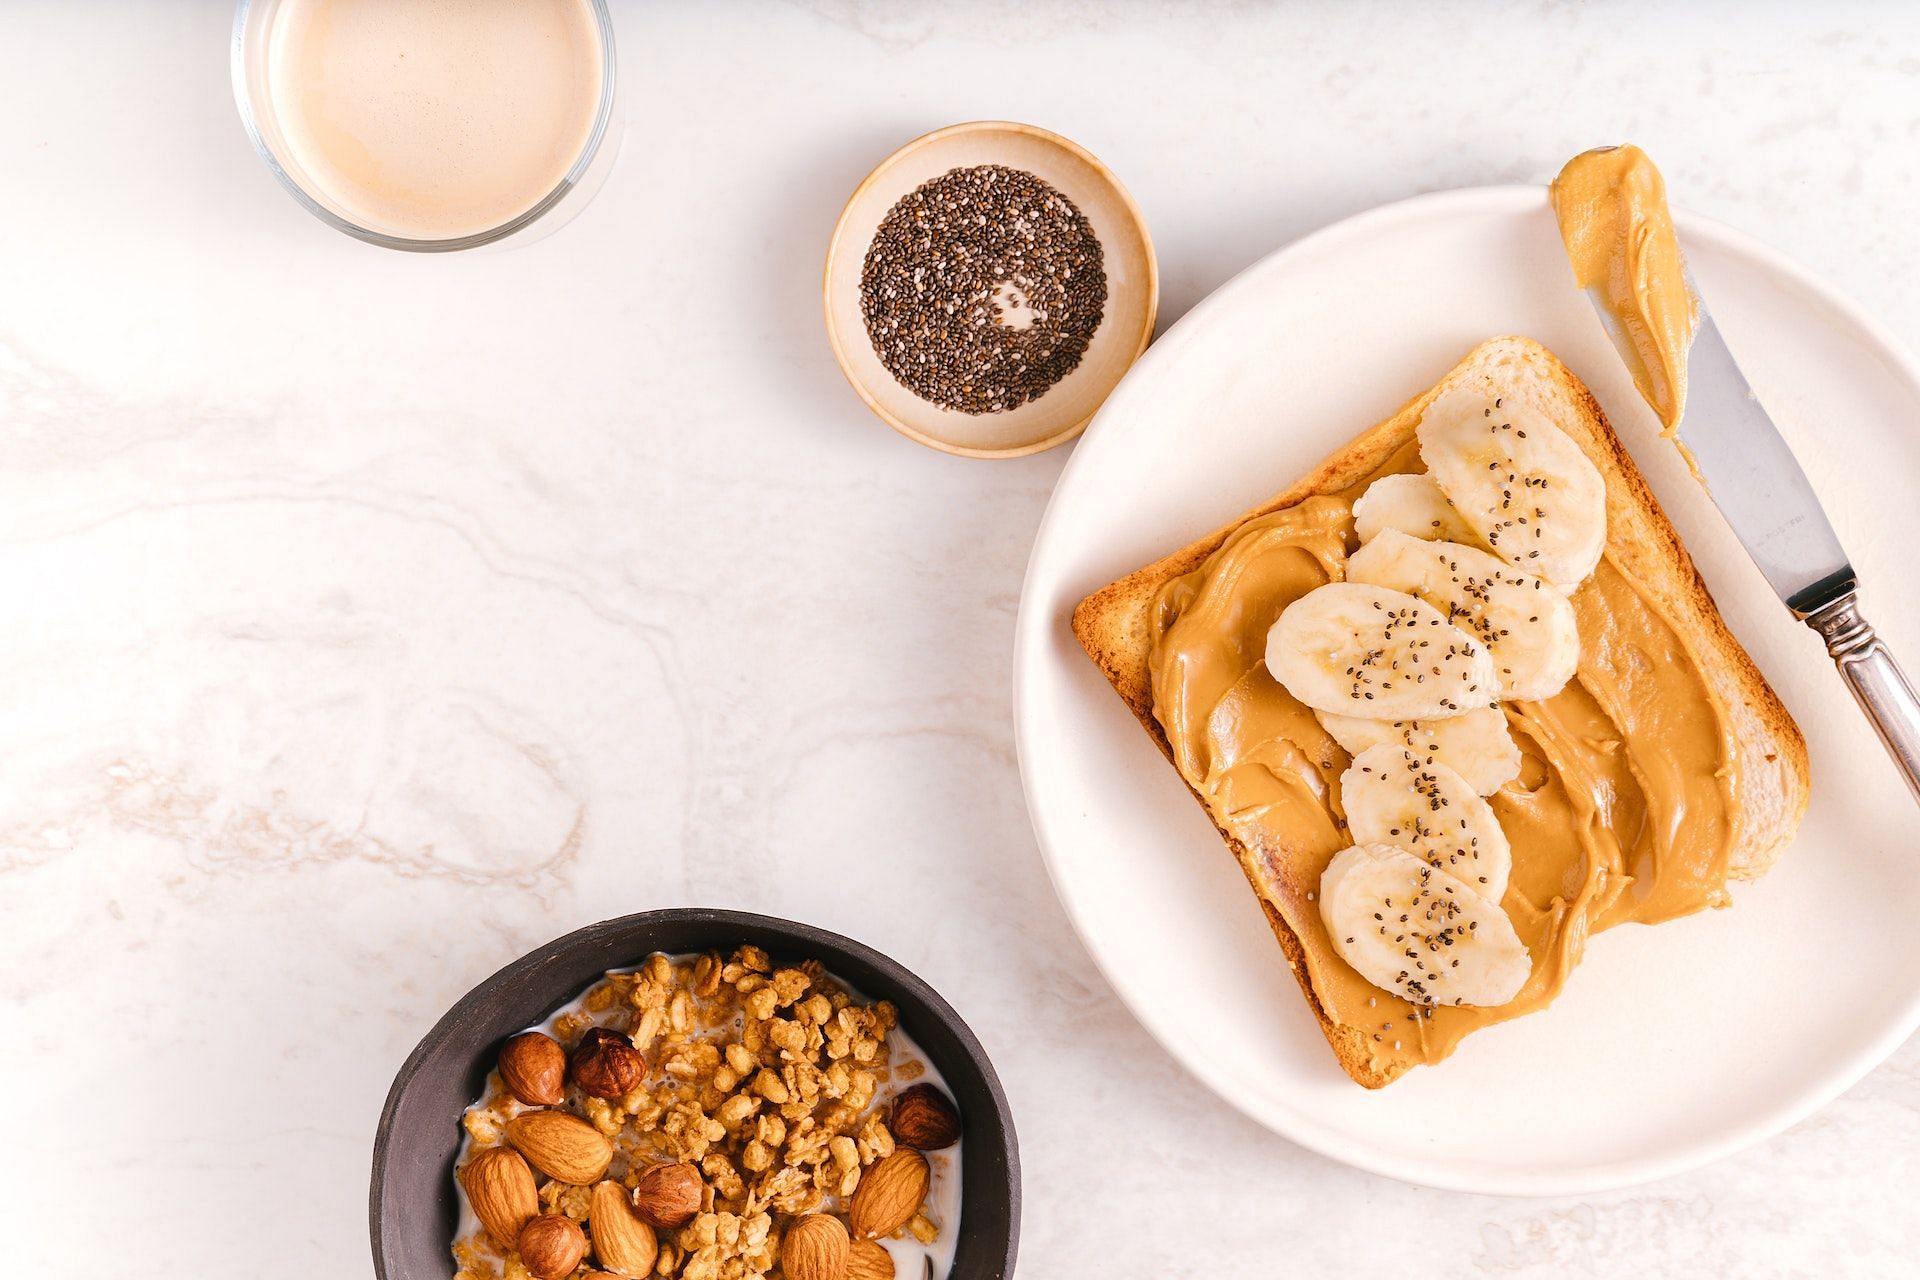 Whole grain bread and peanut butter are great pre-workout food options. (Photo via Pexels/Antoni Shkraba)